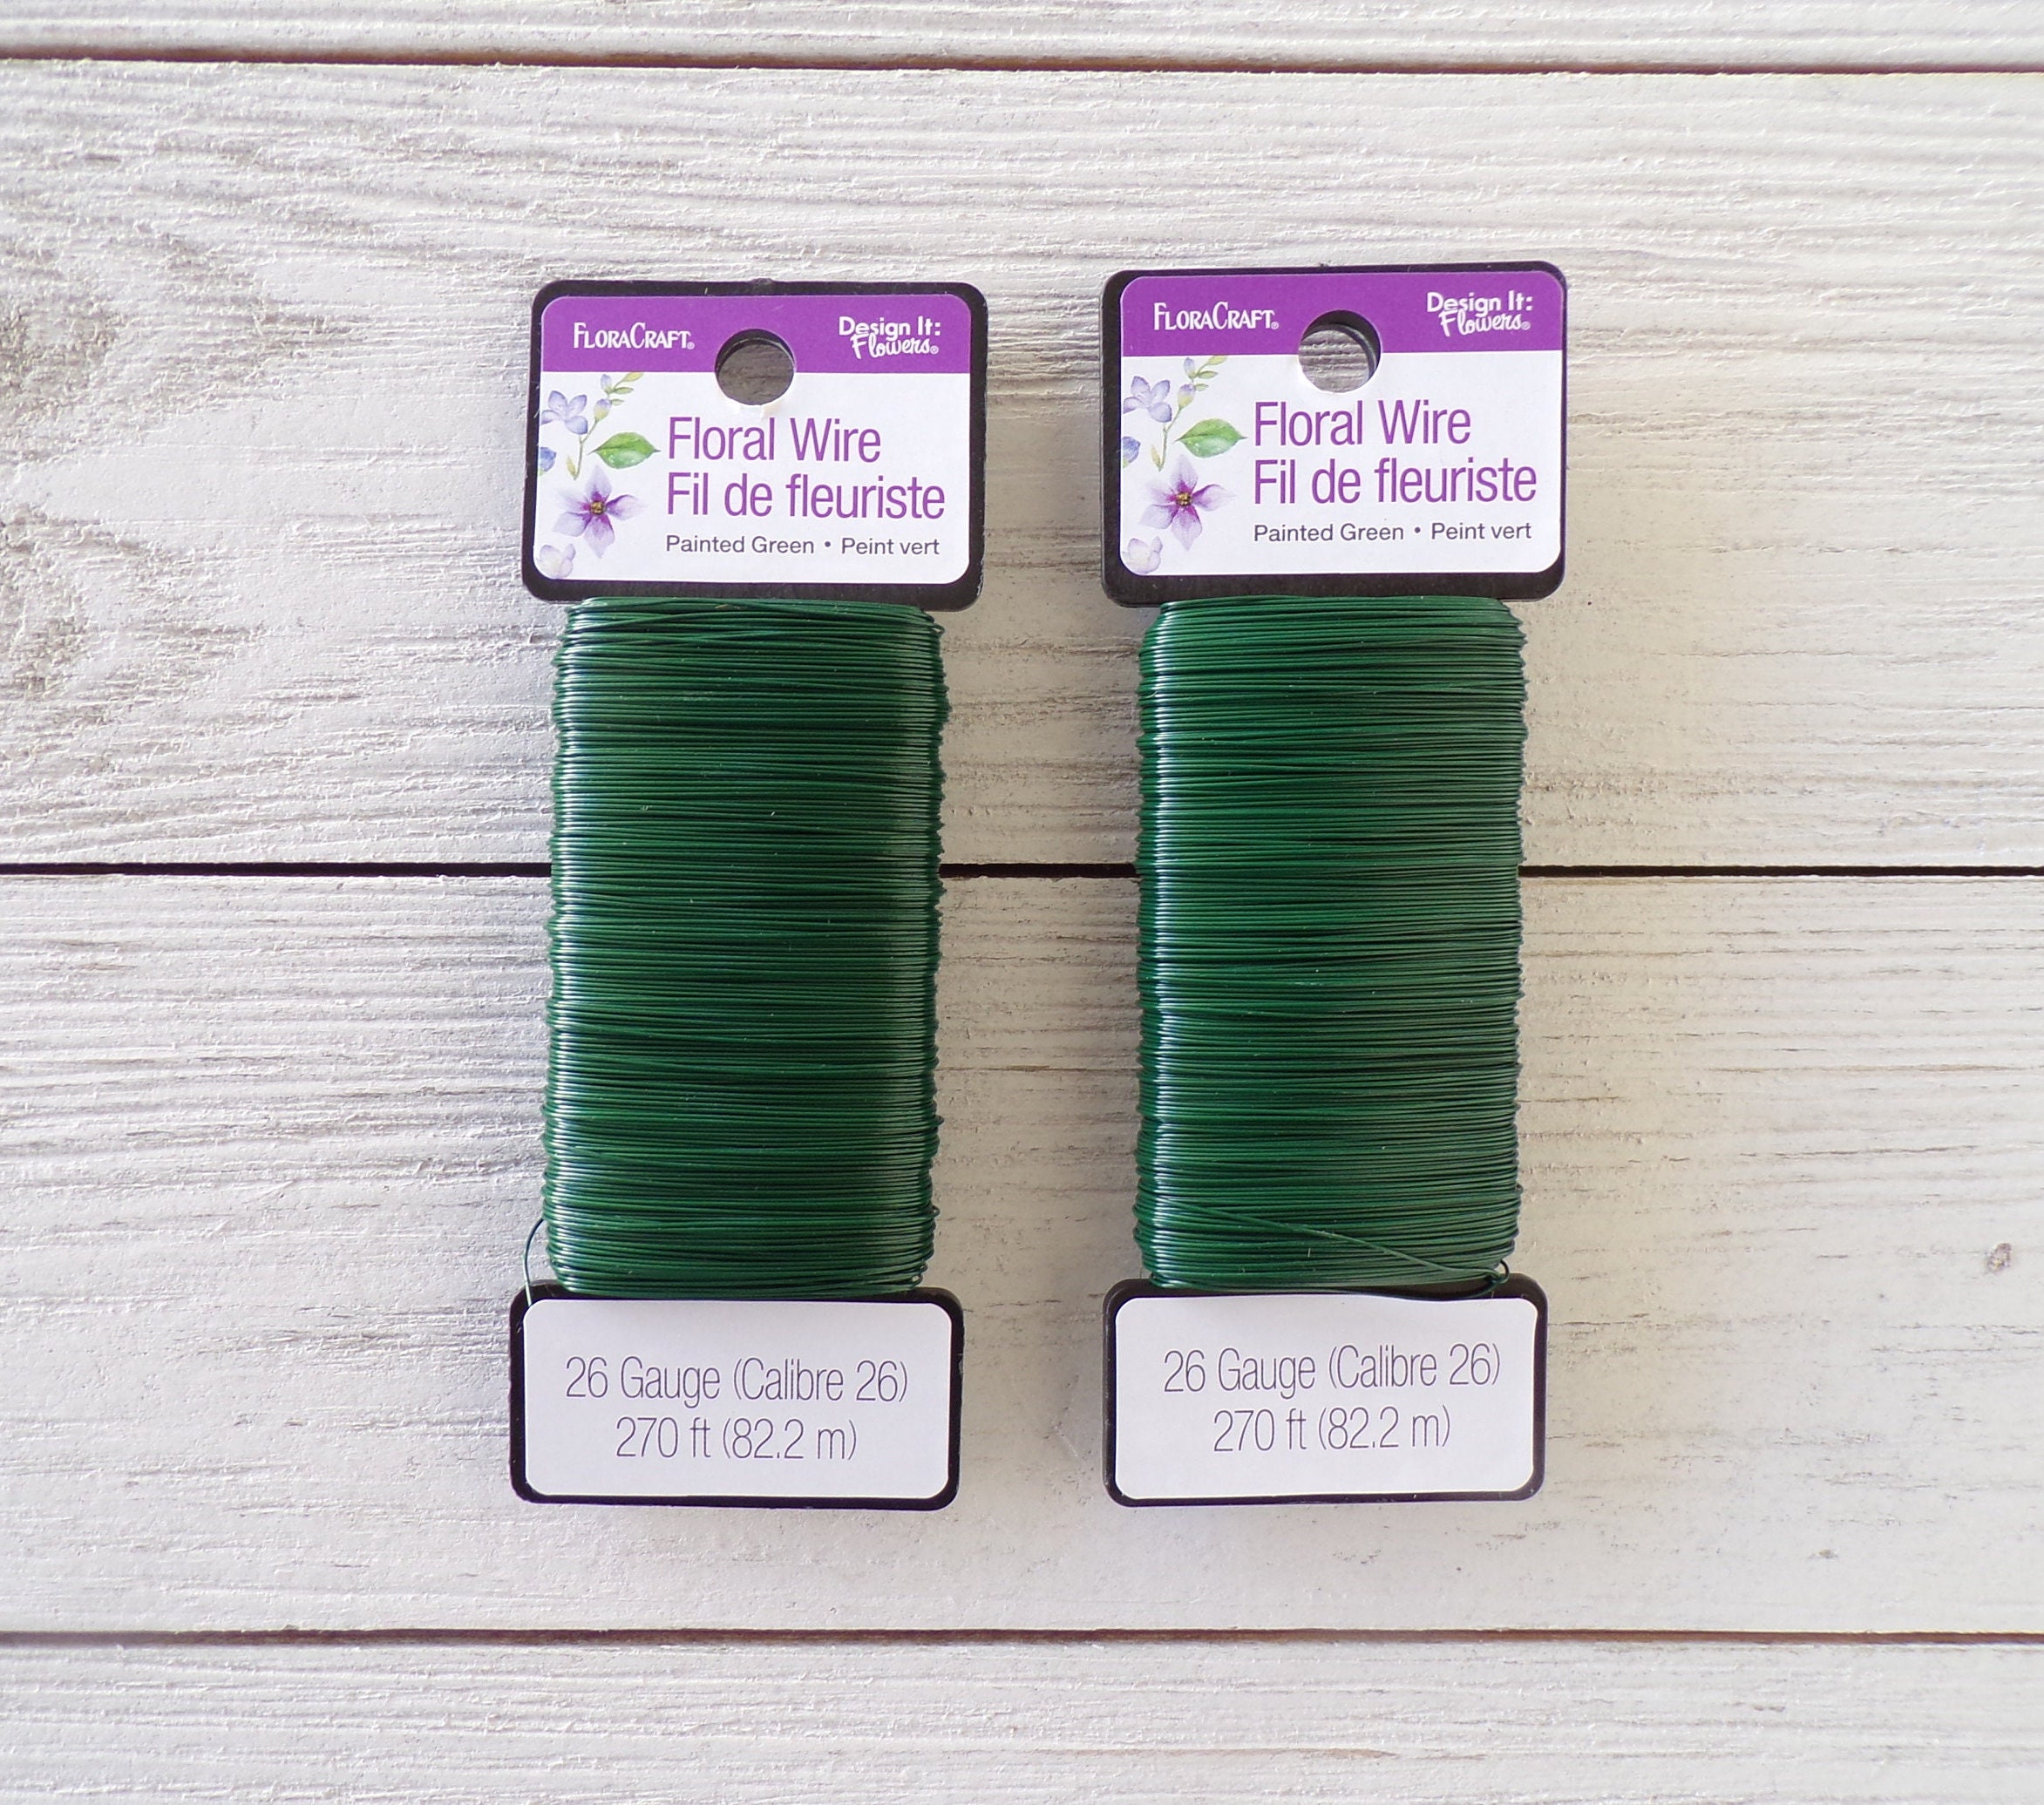 Paddle Wire 26 Gauge, Wholesale Floral Wire - Wholesale Flowers